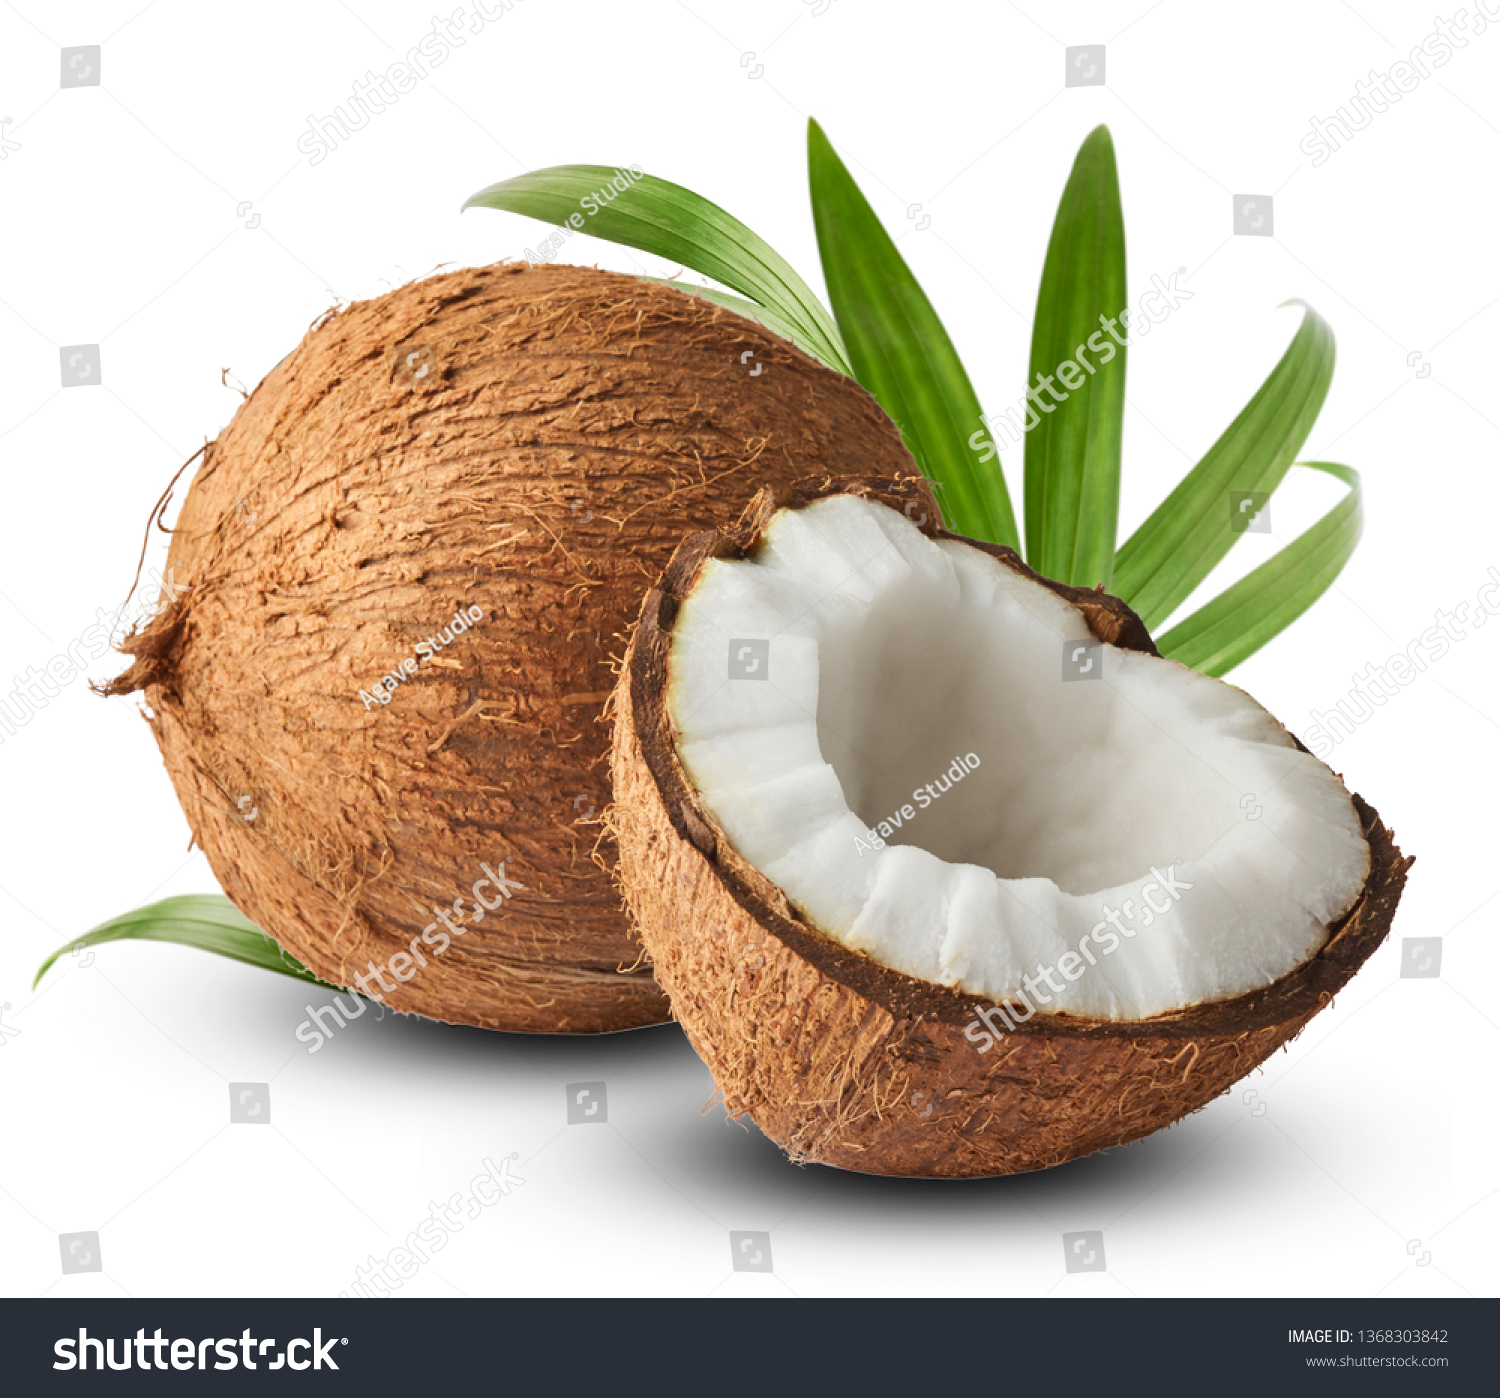 Fresh raw coconut with palm leaves isolated on white background. High resolution image #1368303842